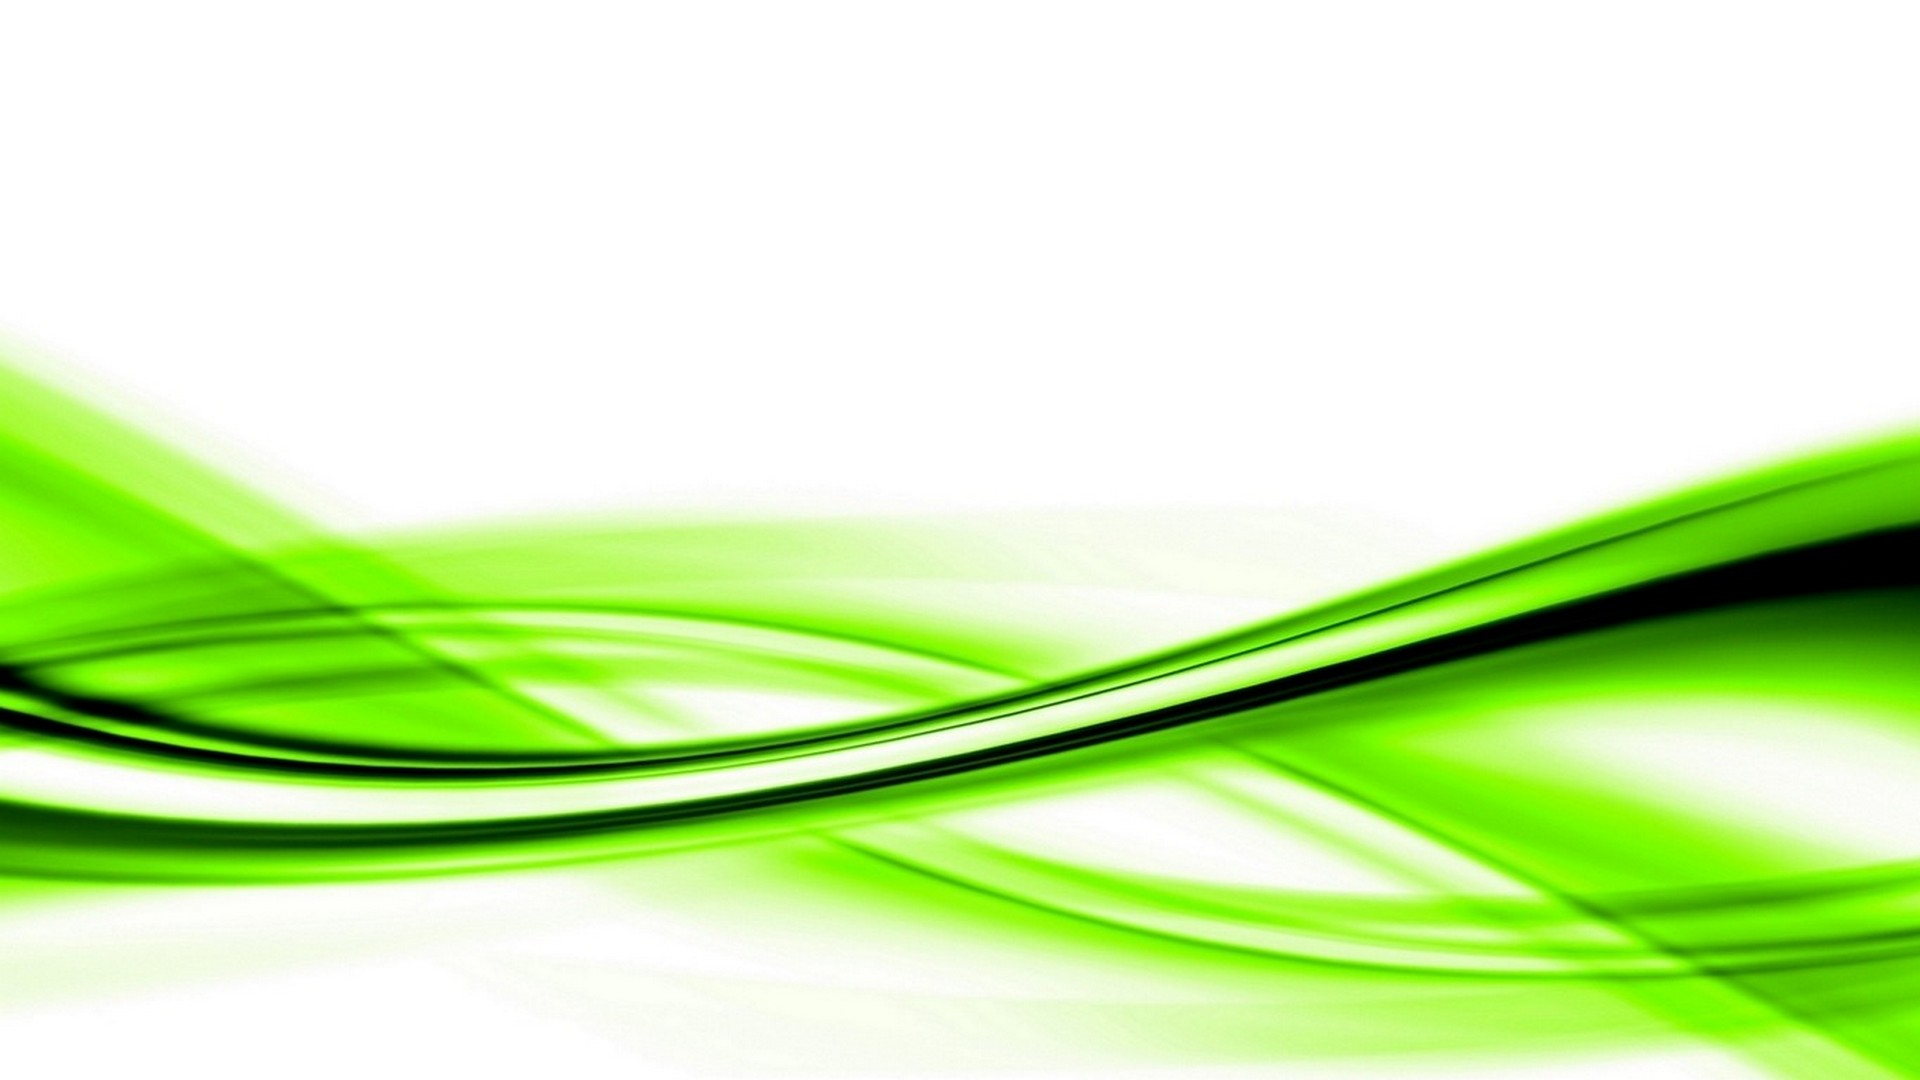 HD Light Green Backgrounds with image resolution 1920x1080 pixel. You can use this wallpaper as background for your desktop Computer Screensavers, Android or iPhone smartphones